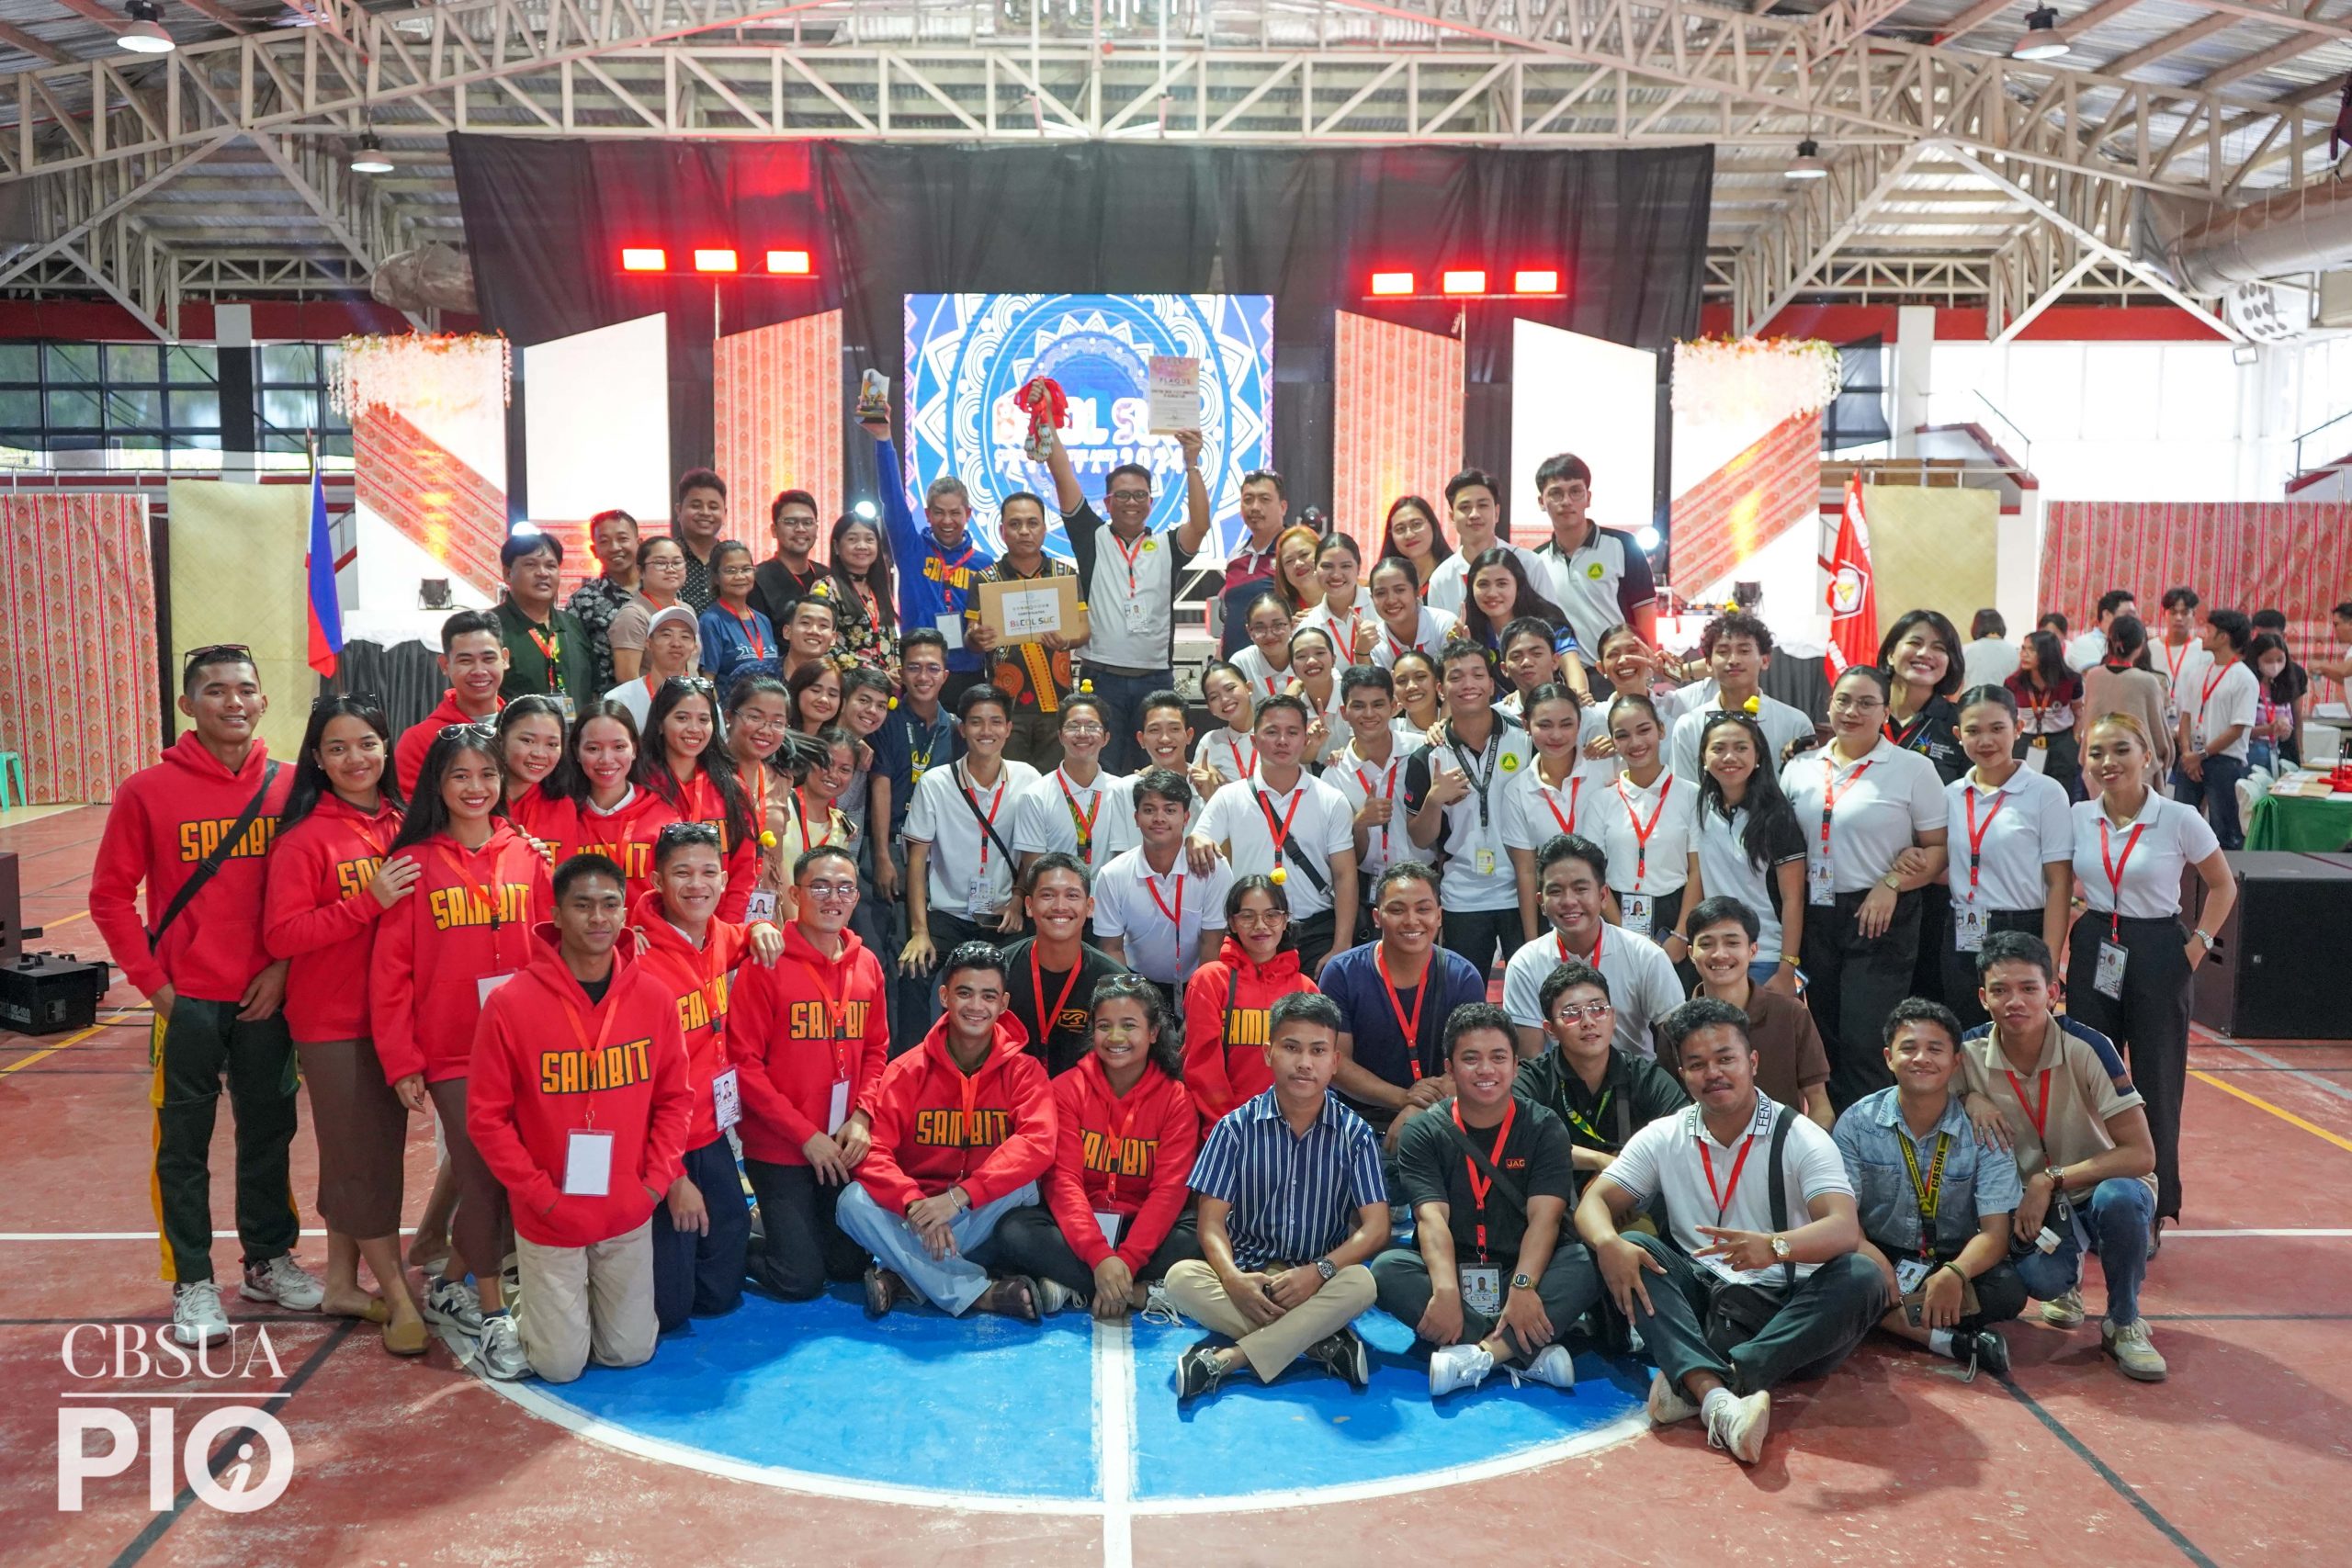 CENTRAL BICOL STATE UNIVERSITY SECURES 5TH RUNNER-UP SPOT IN REGIONAL CULTURE & ARTS FESTIVAL